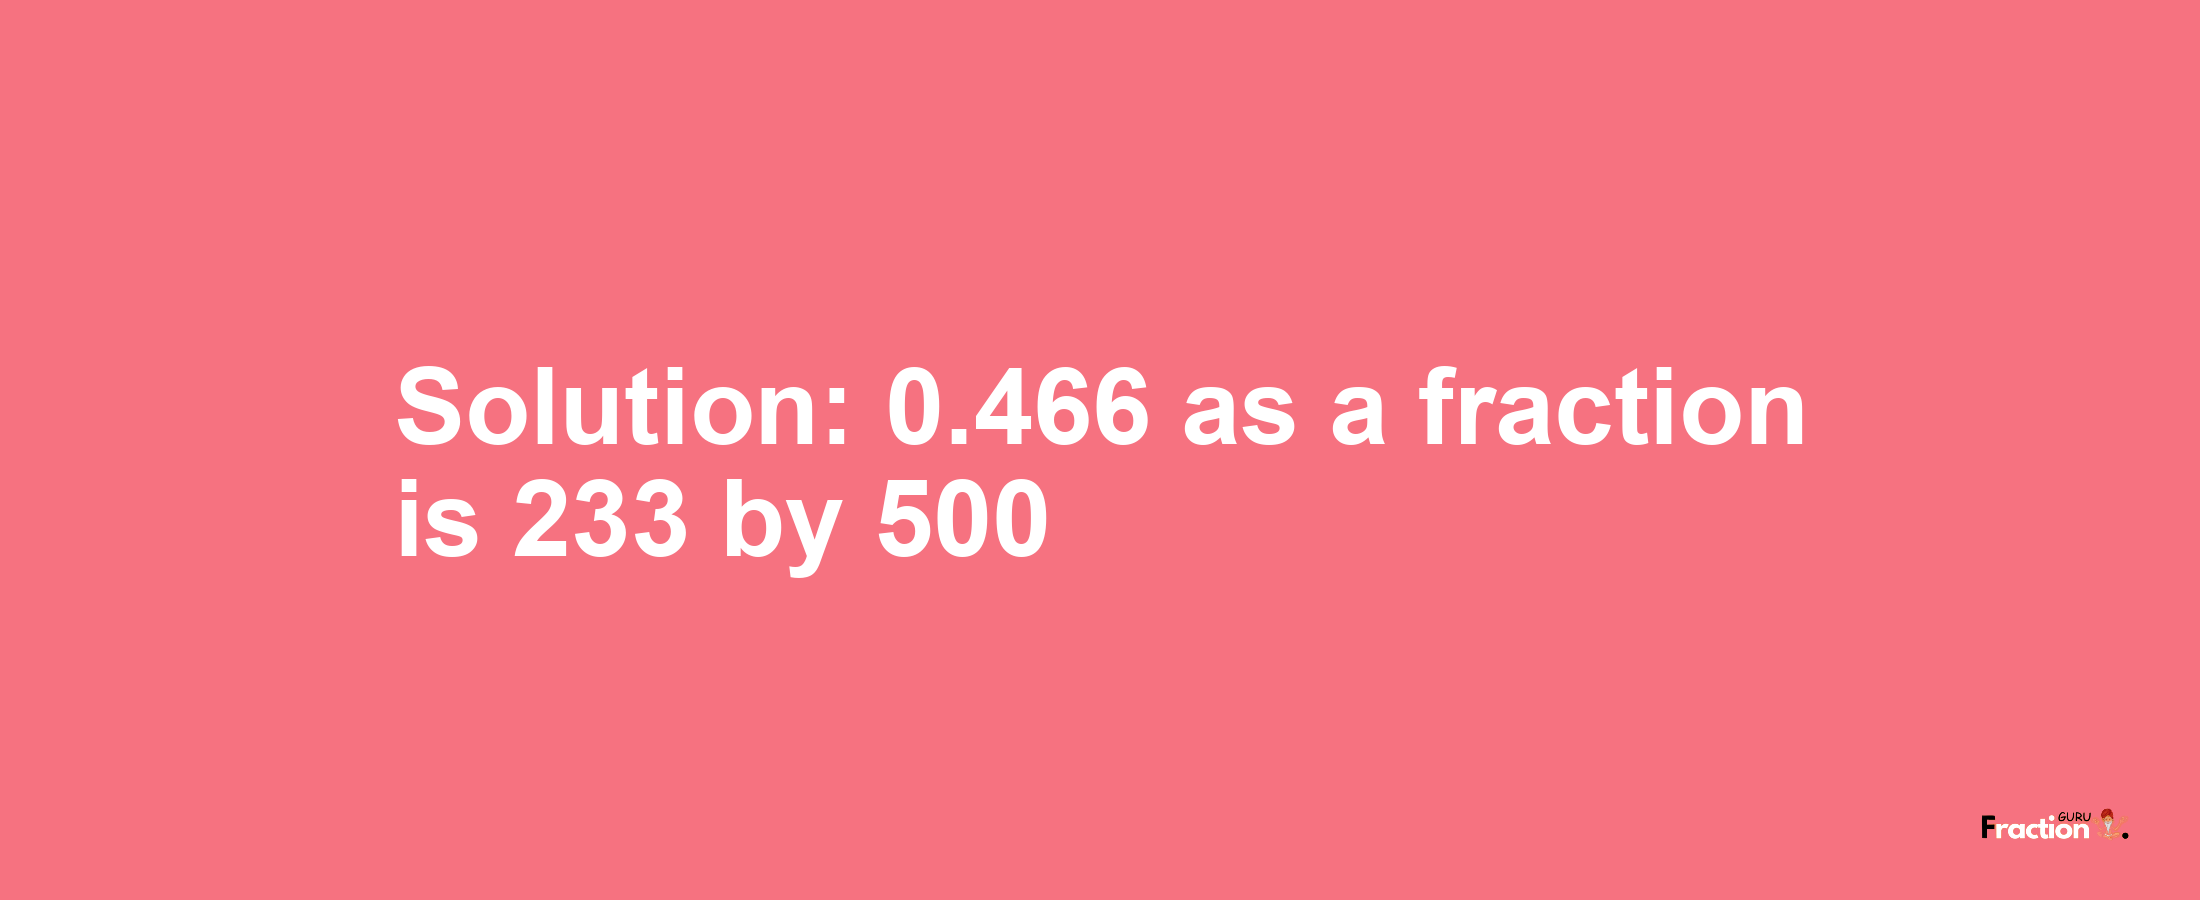 Solution:0.466 as a fraction is 233/500